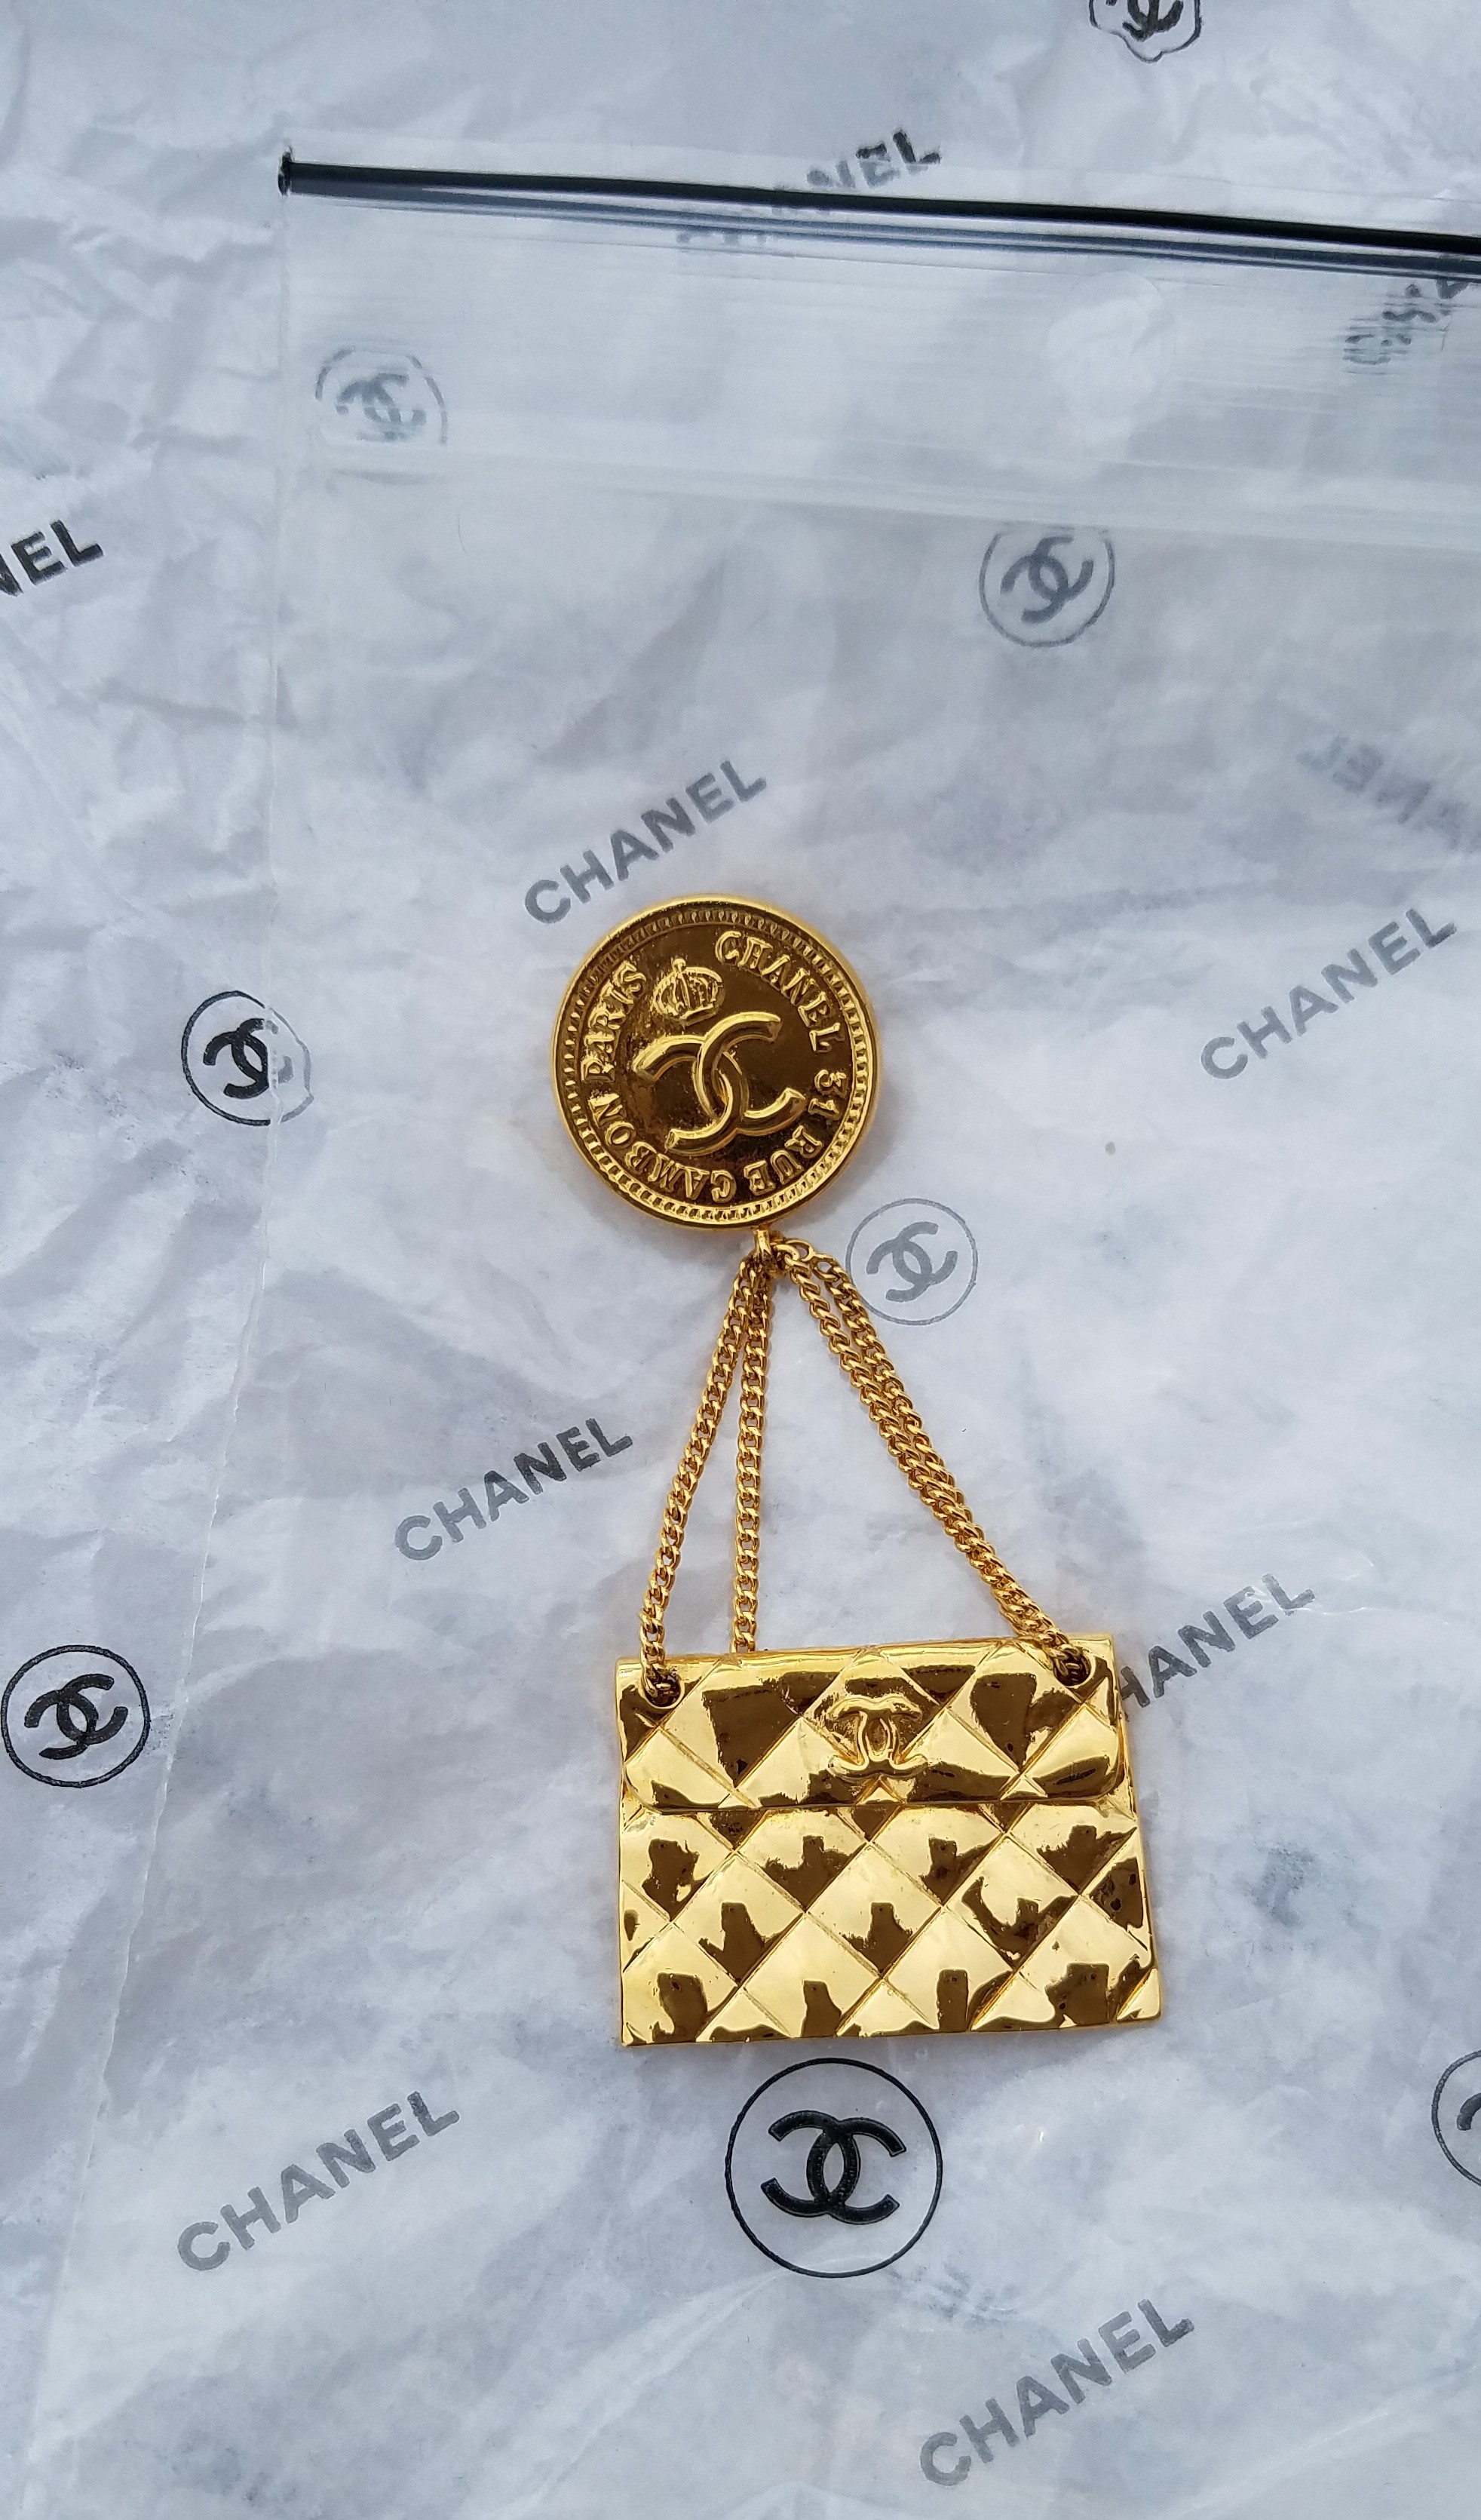 old vintage chanel bag authentic